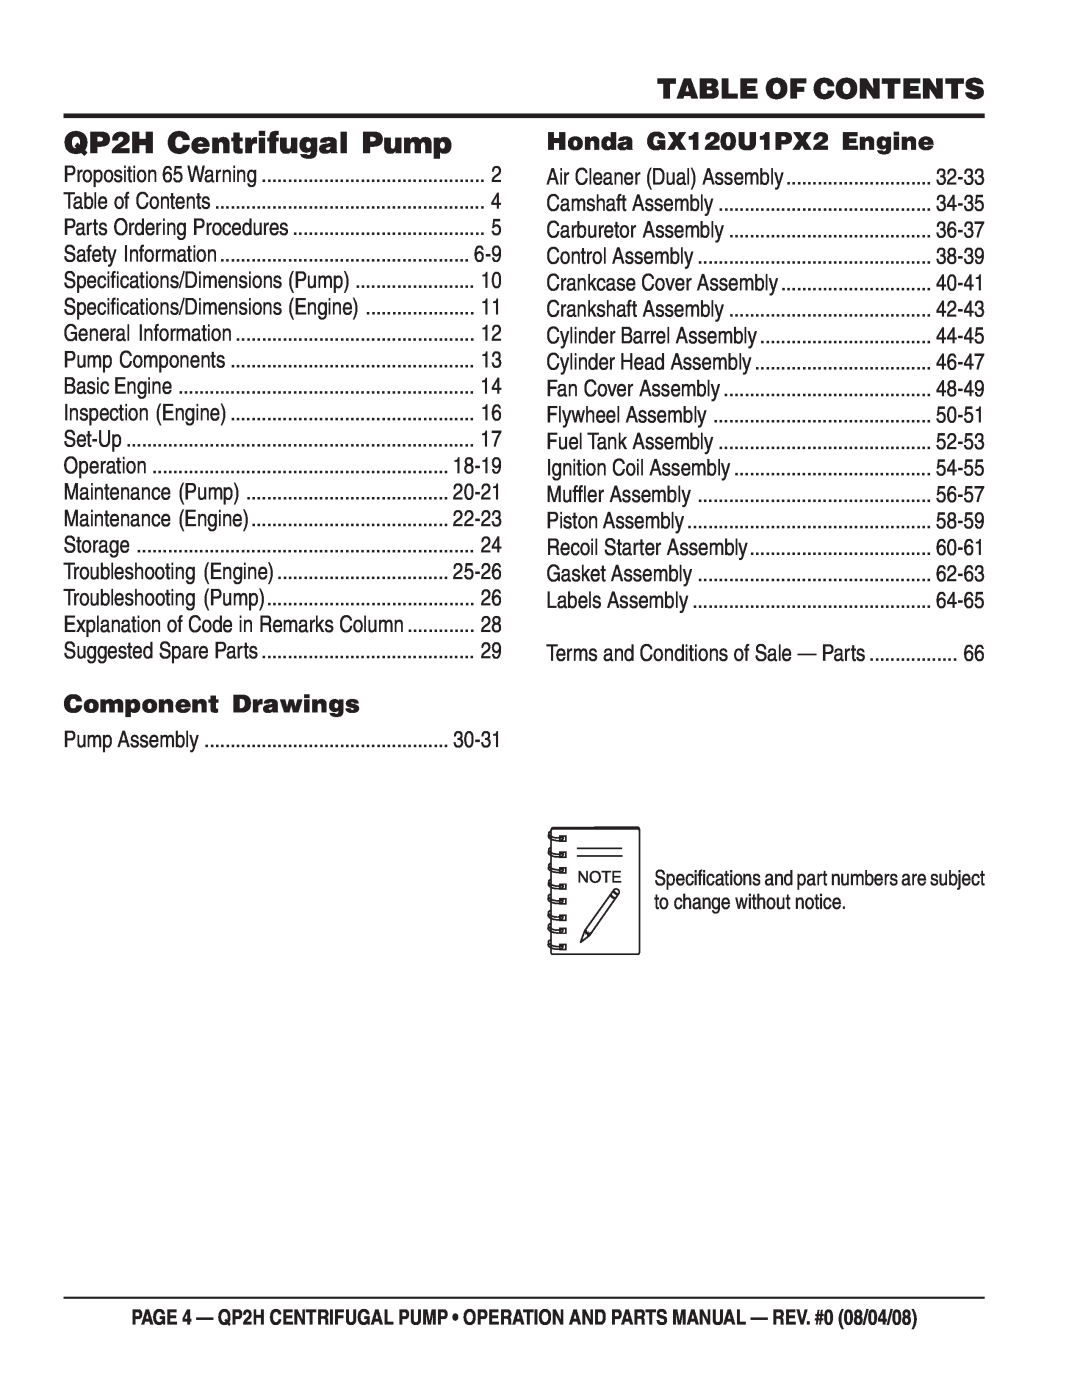 Multiquip manual Table Of Contents, Honda GX120U1PX2 Engine, Component Drawings, QP2H Centrifugal Pump 